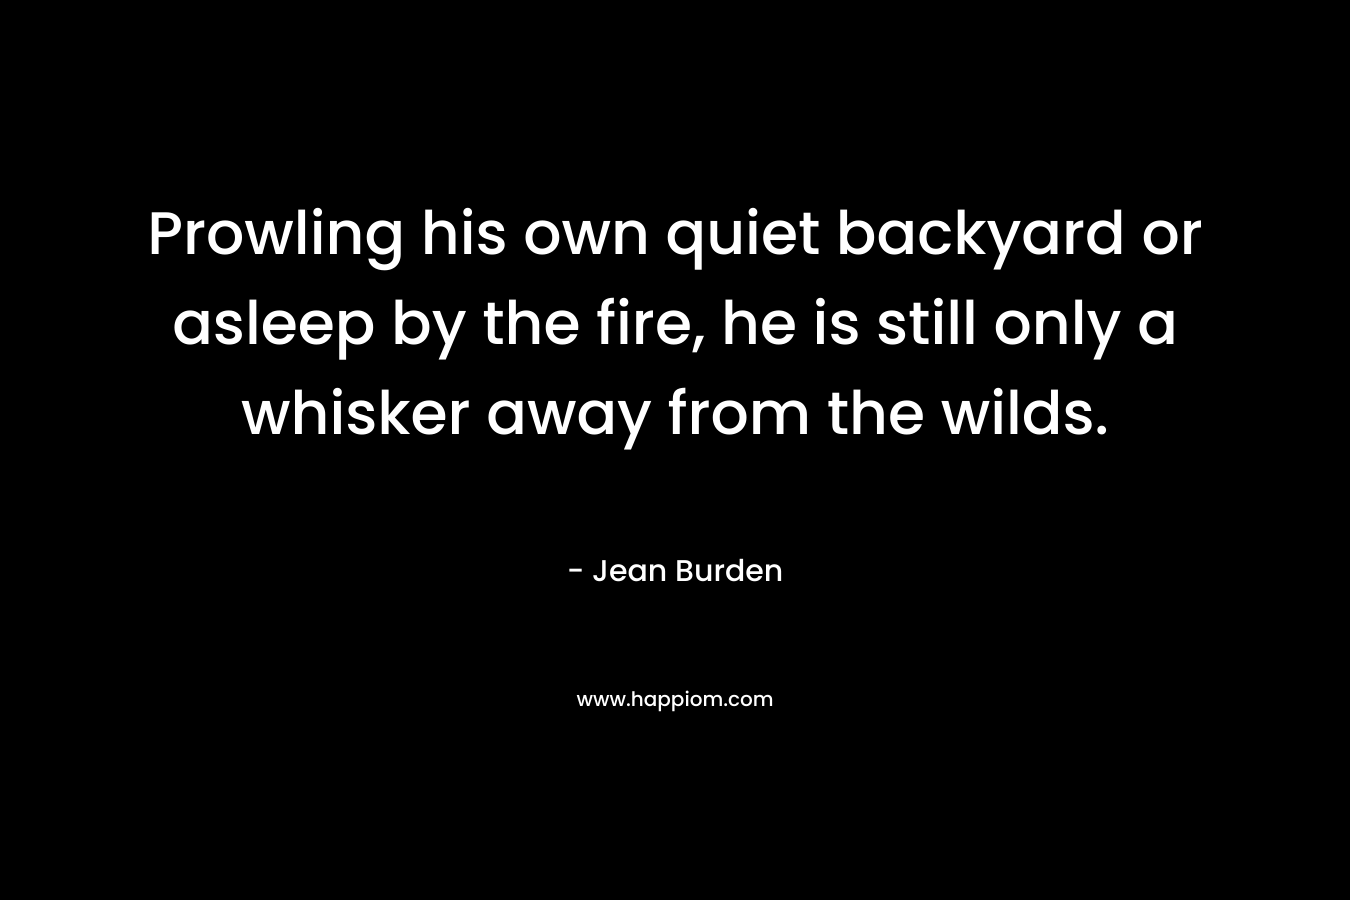 Prowling his own quiet backyard or asleep by the fire, he is still only a whisker away from the wilds. – Jean Burden